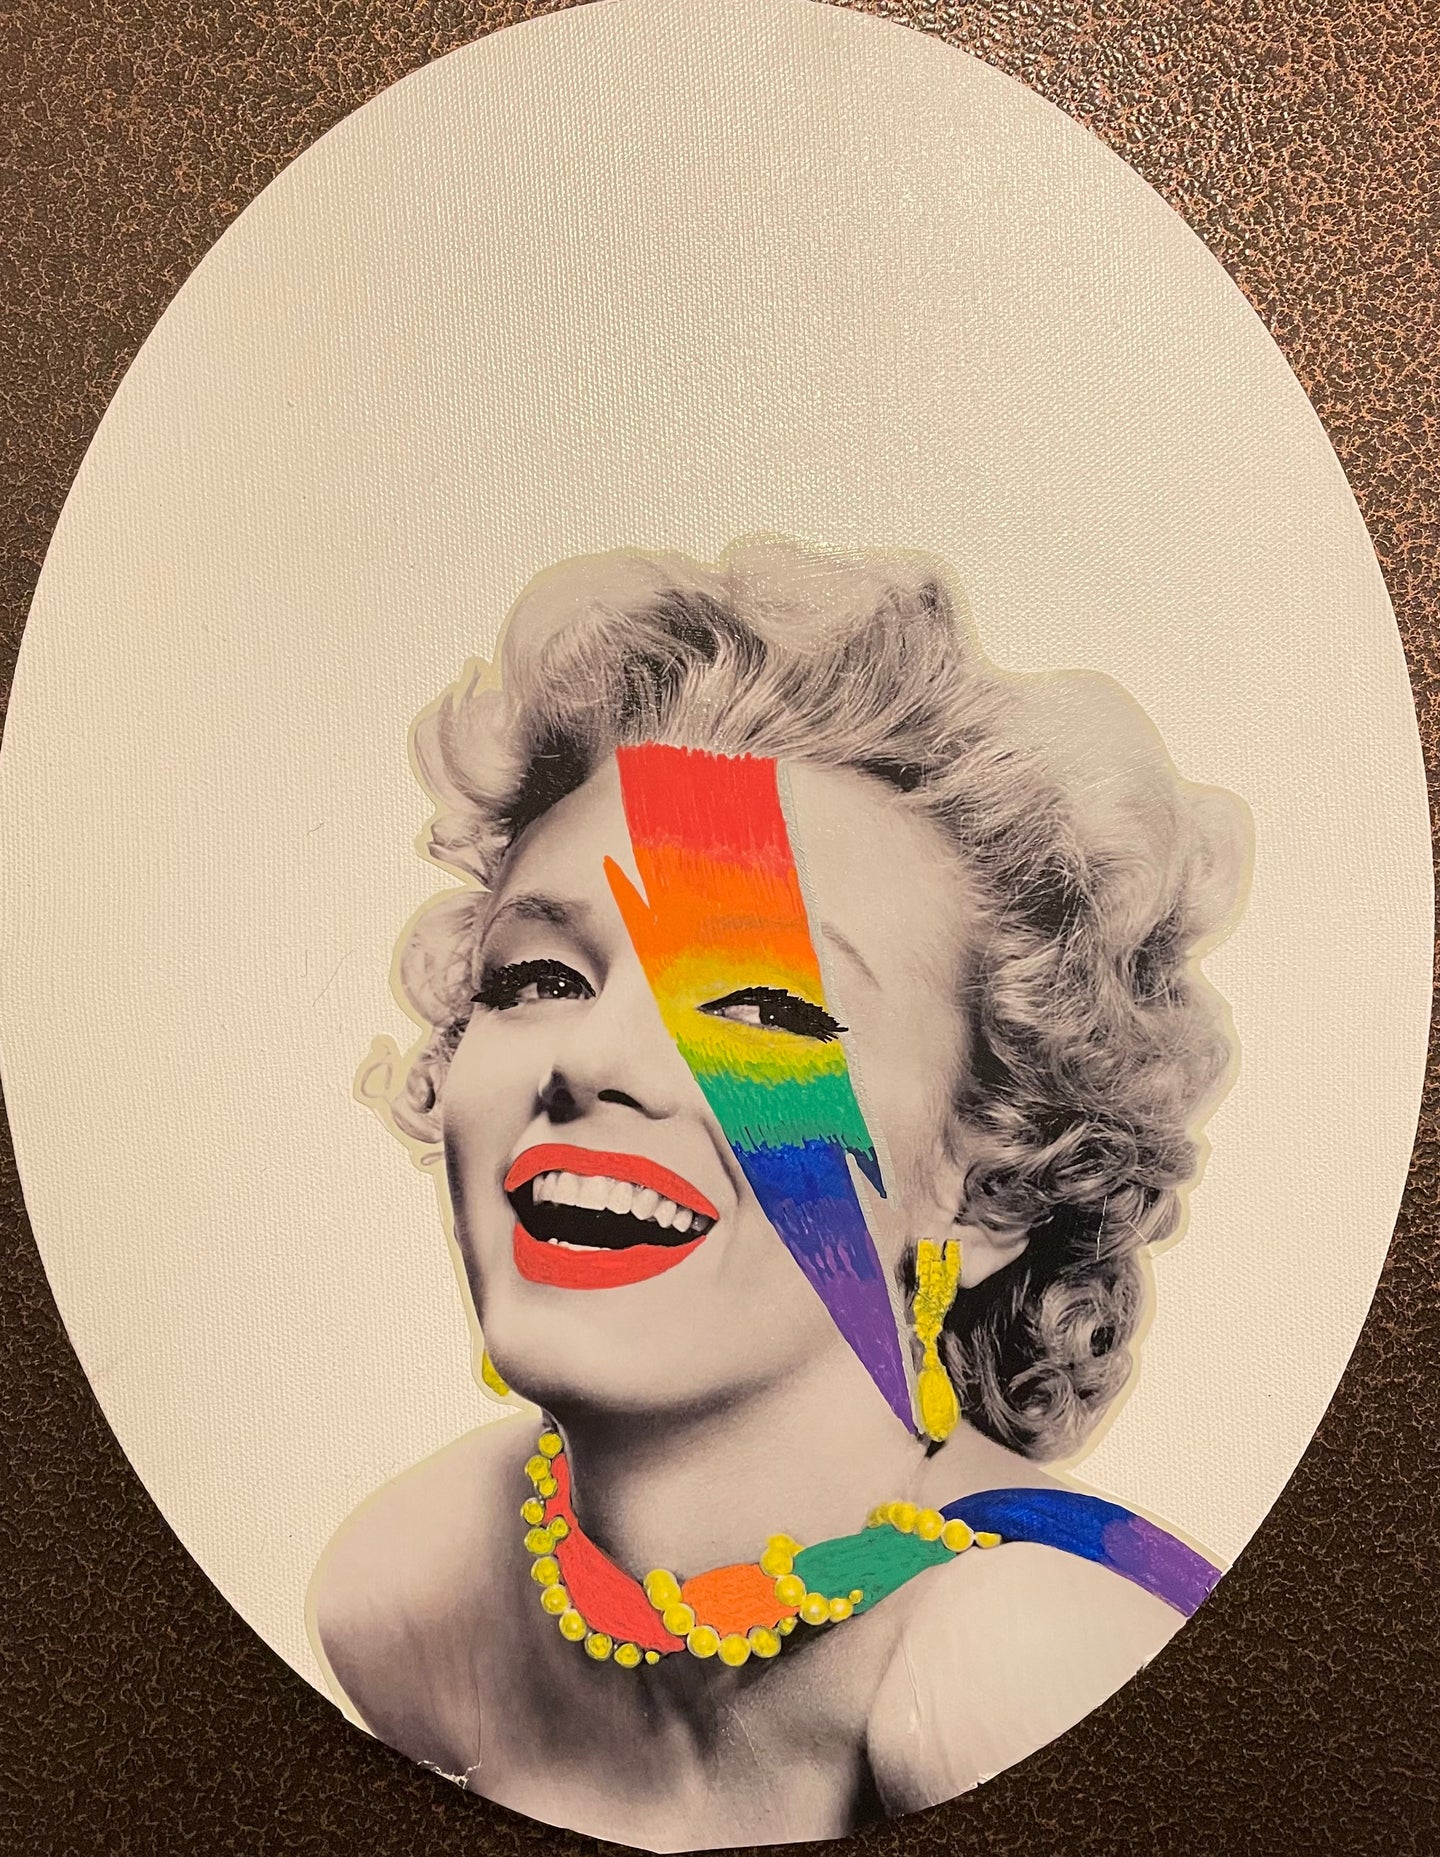 Let’s Have A Kiki Marilyn by Shelby Dillinger